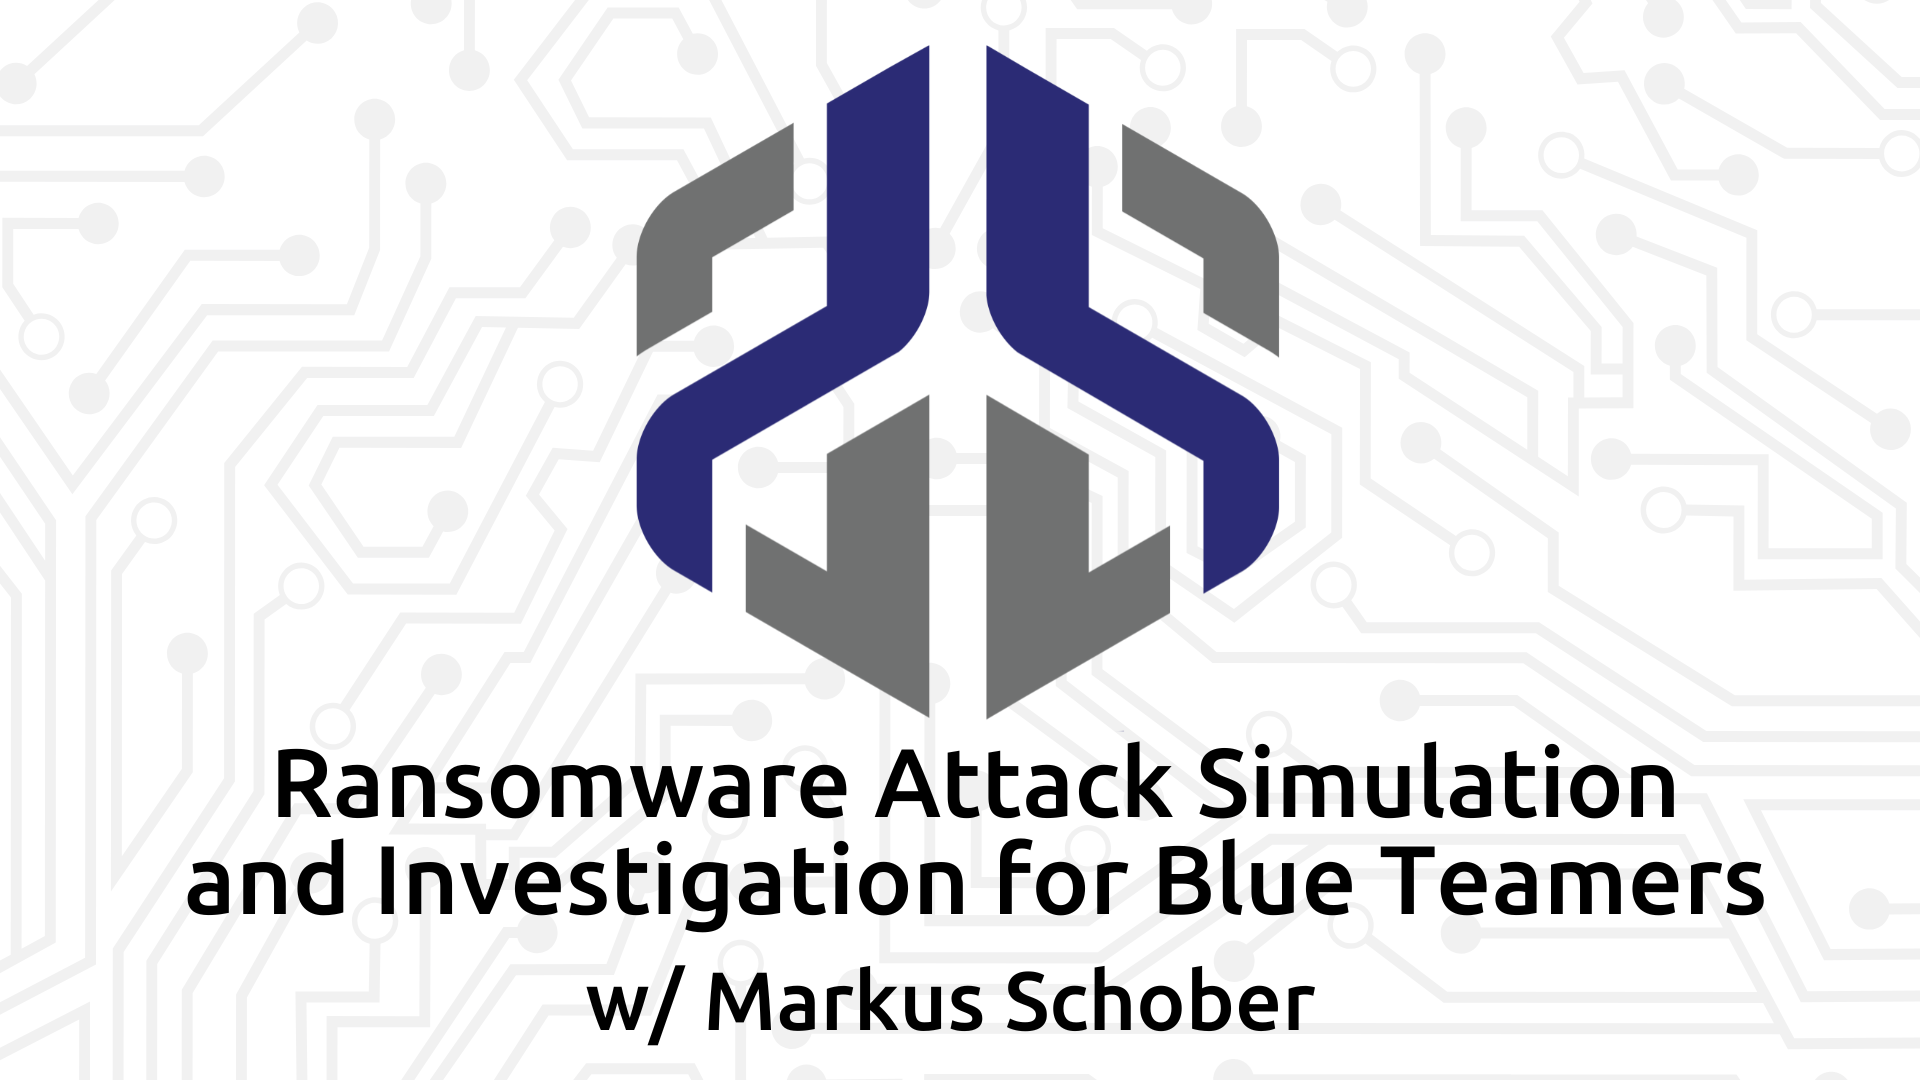 Ransomware Attack Simulation and Investigation for Blue Teamers